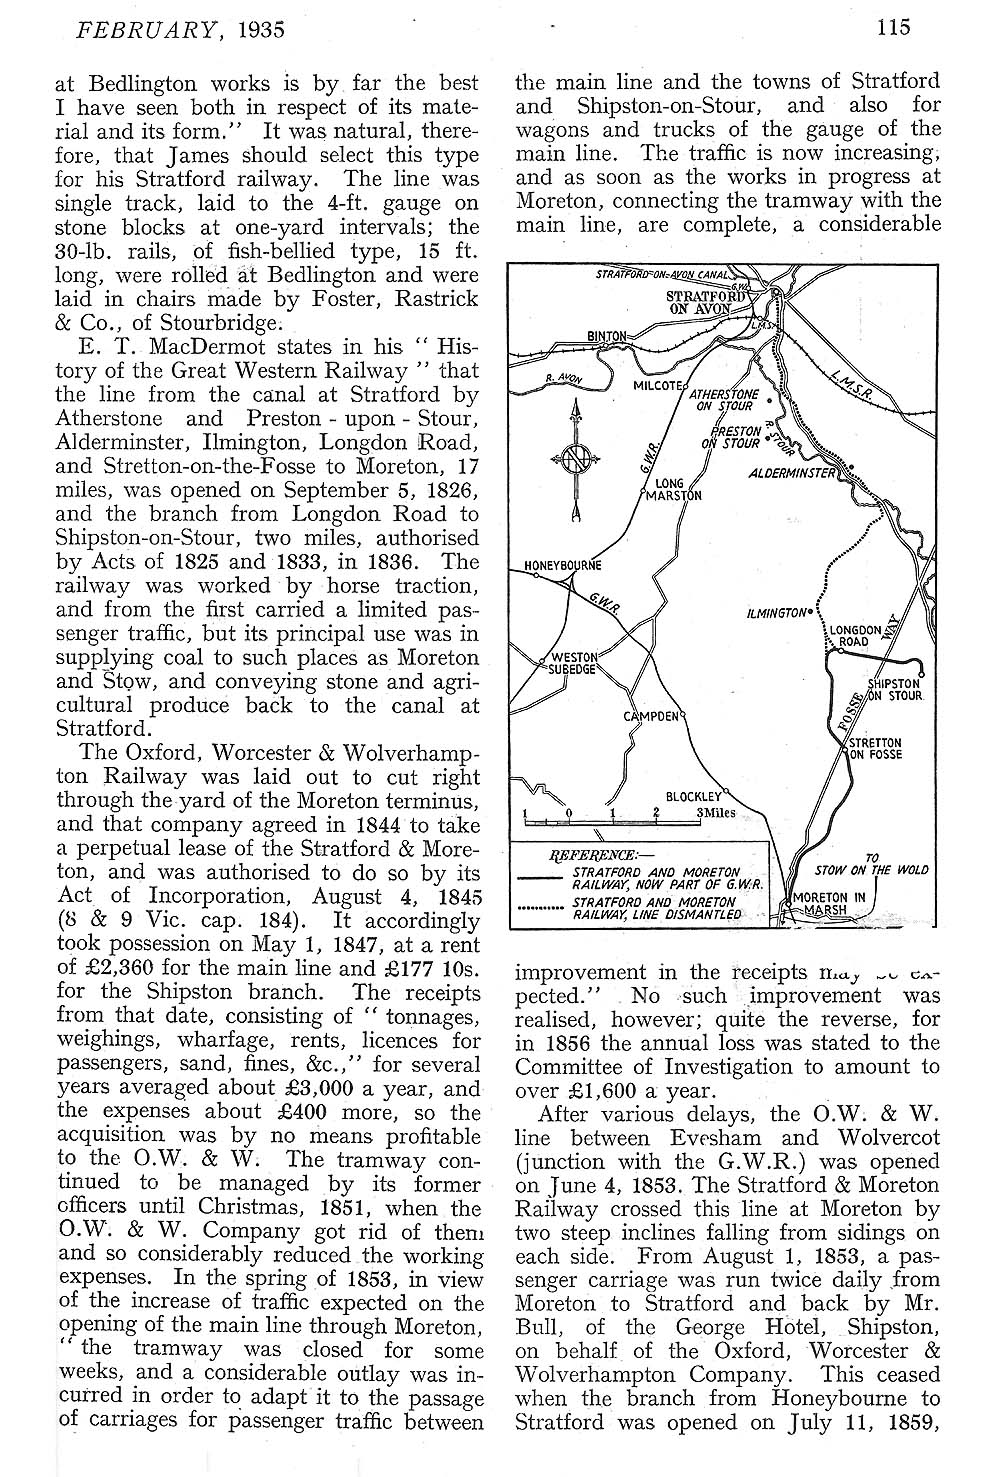 GWR Appendix to the March 1950 STT detailing the local instructions as to the occupation of the Shipston-on-Stour Branch